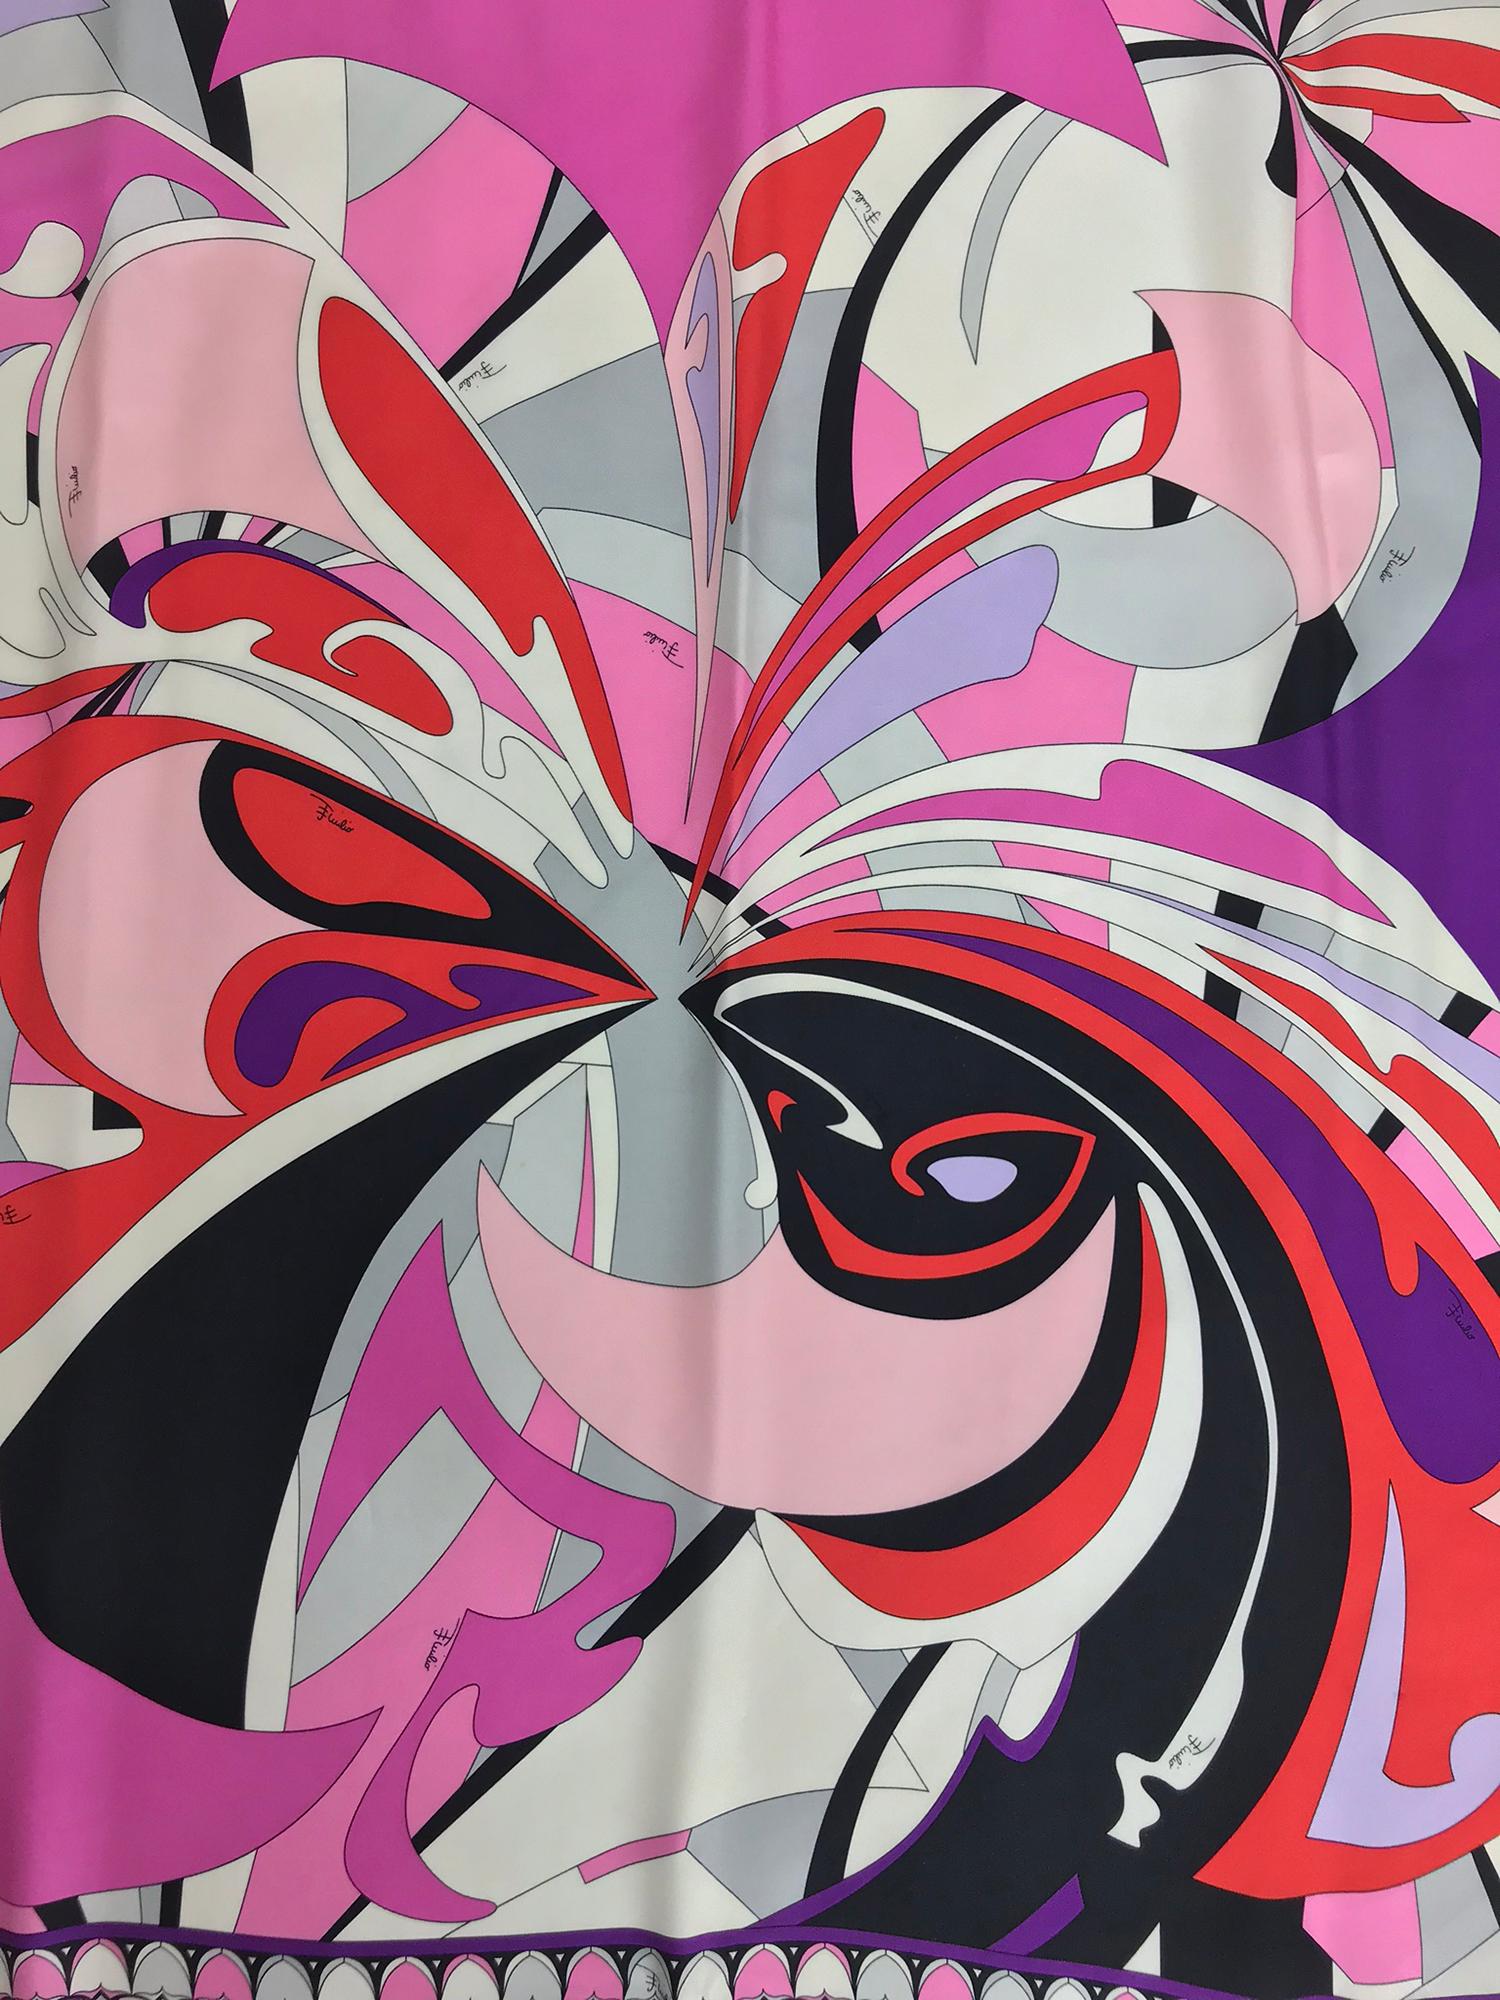 Pucci signed silk twill print scarf in hot pink, orange, purple, black, pale pink and white. Hand rolled edge. In excellent condition. 34